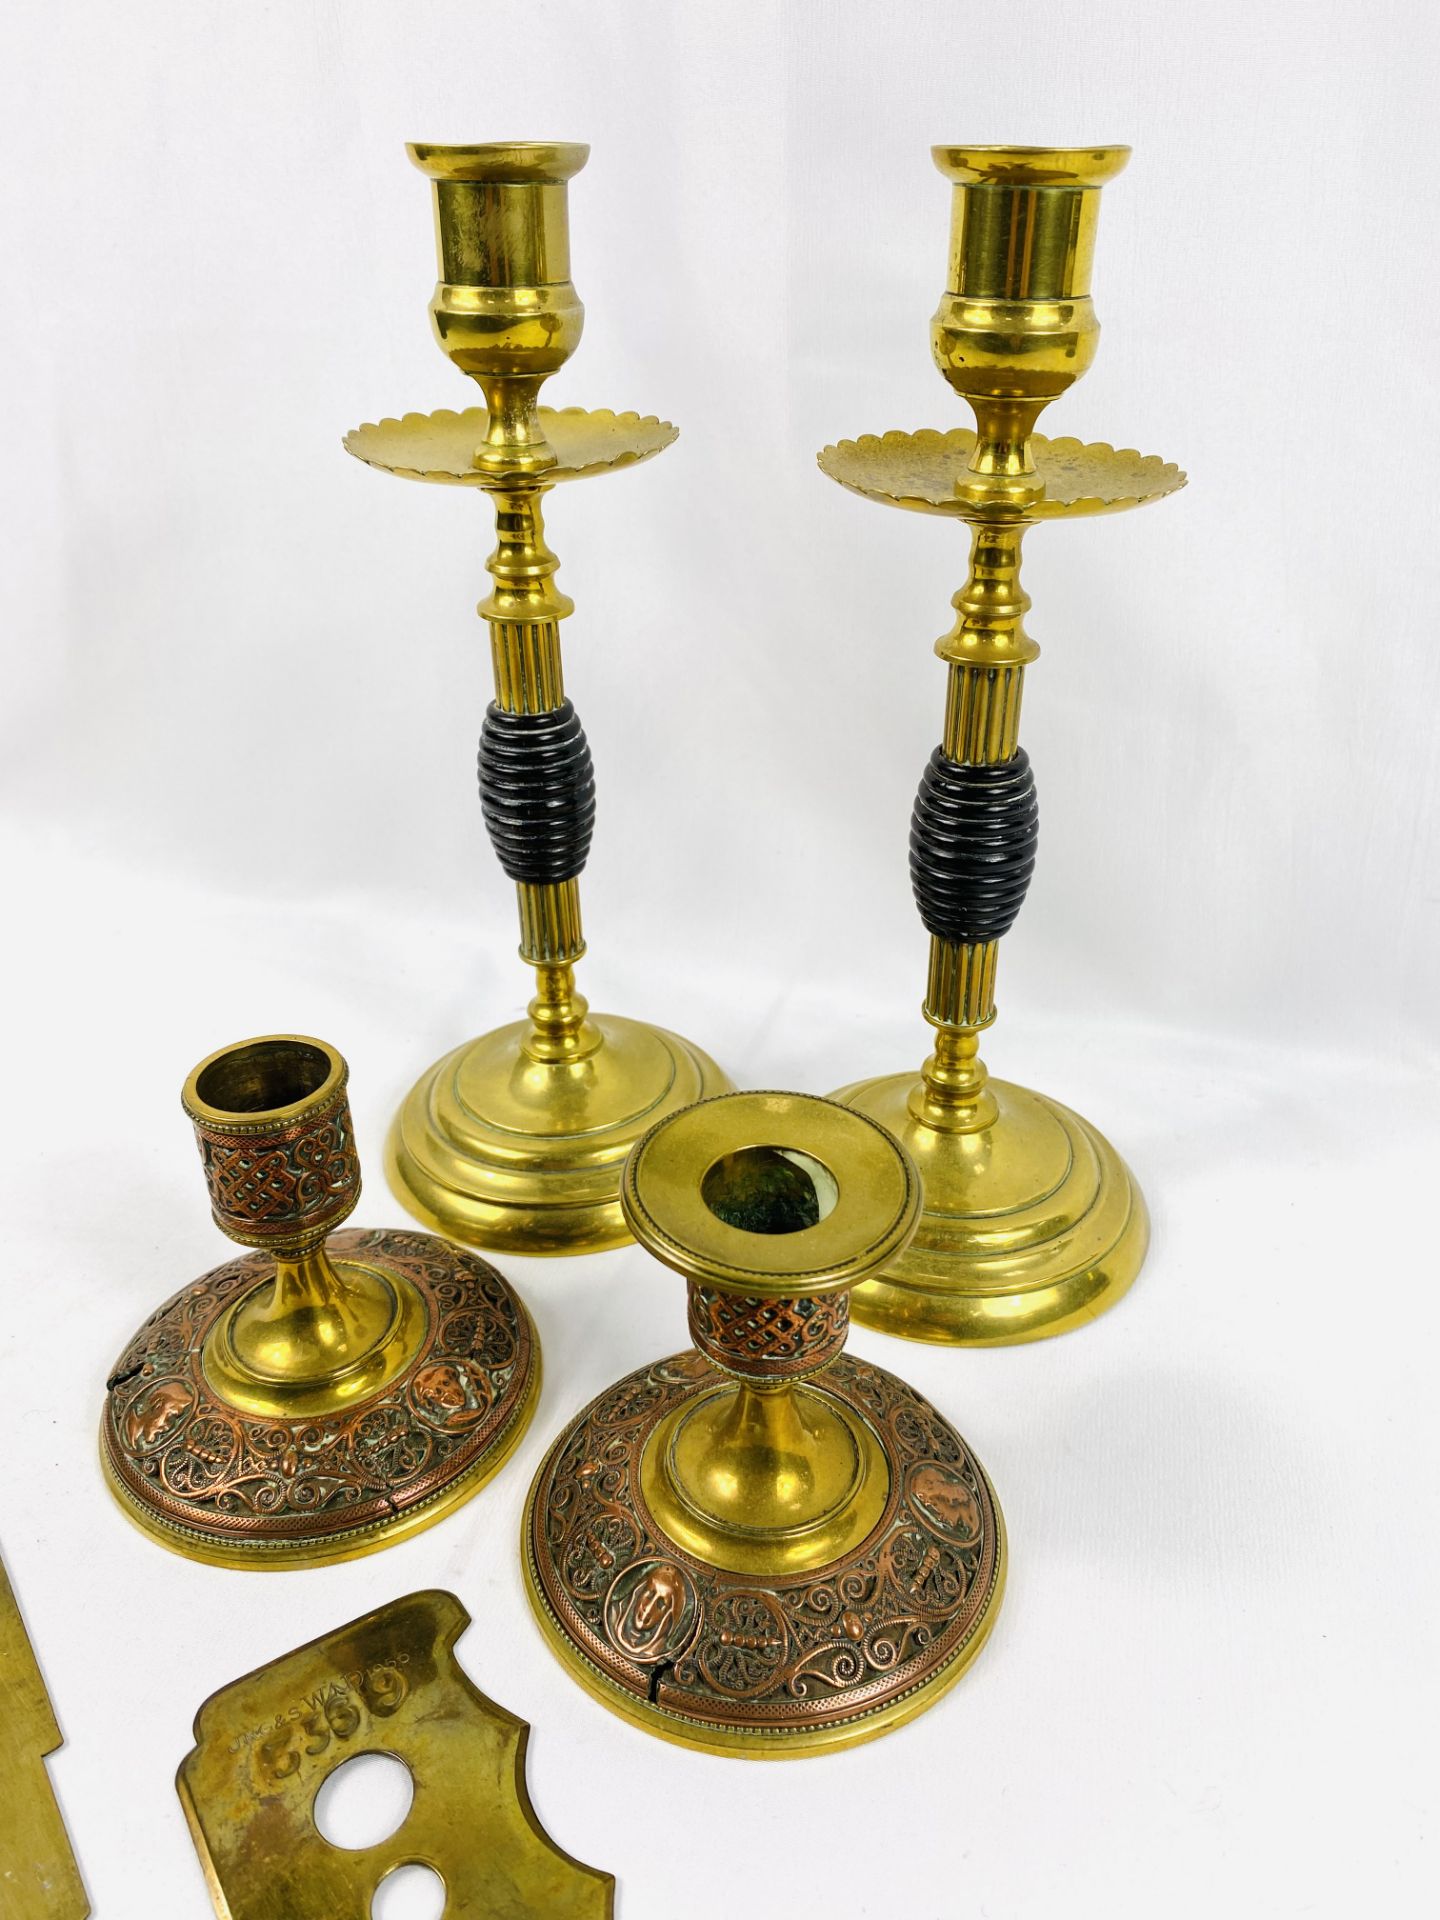 Pair of brass candlesticks and other items - Image 2 of 4